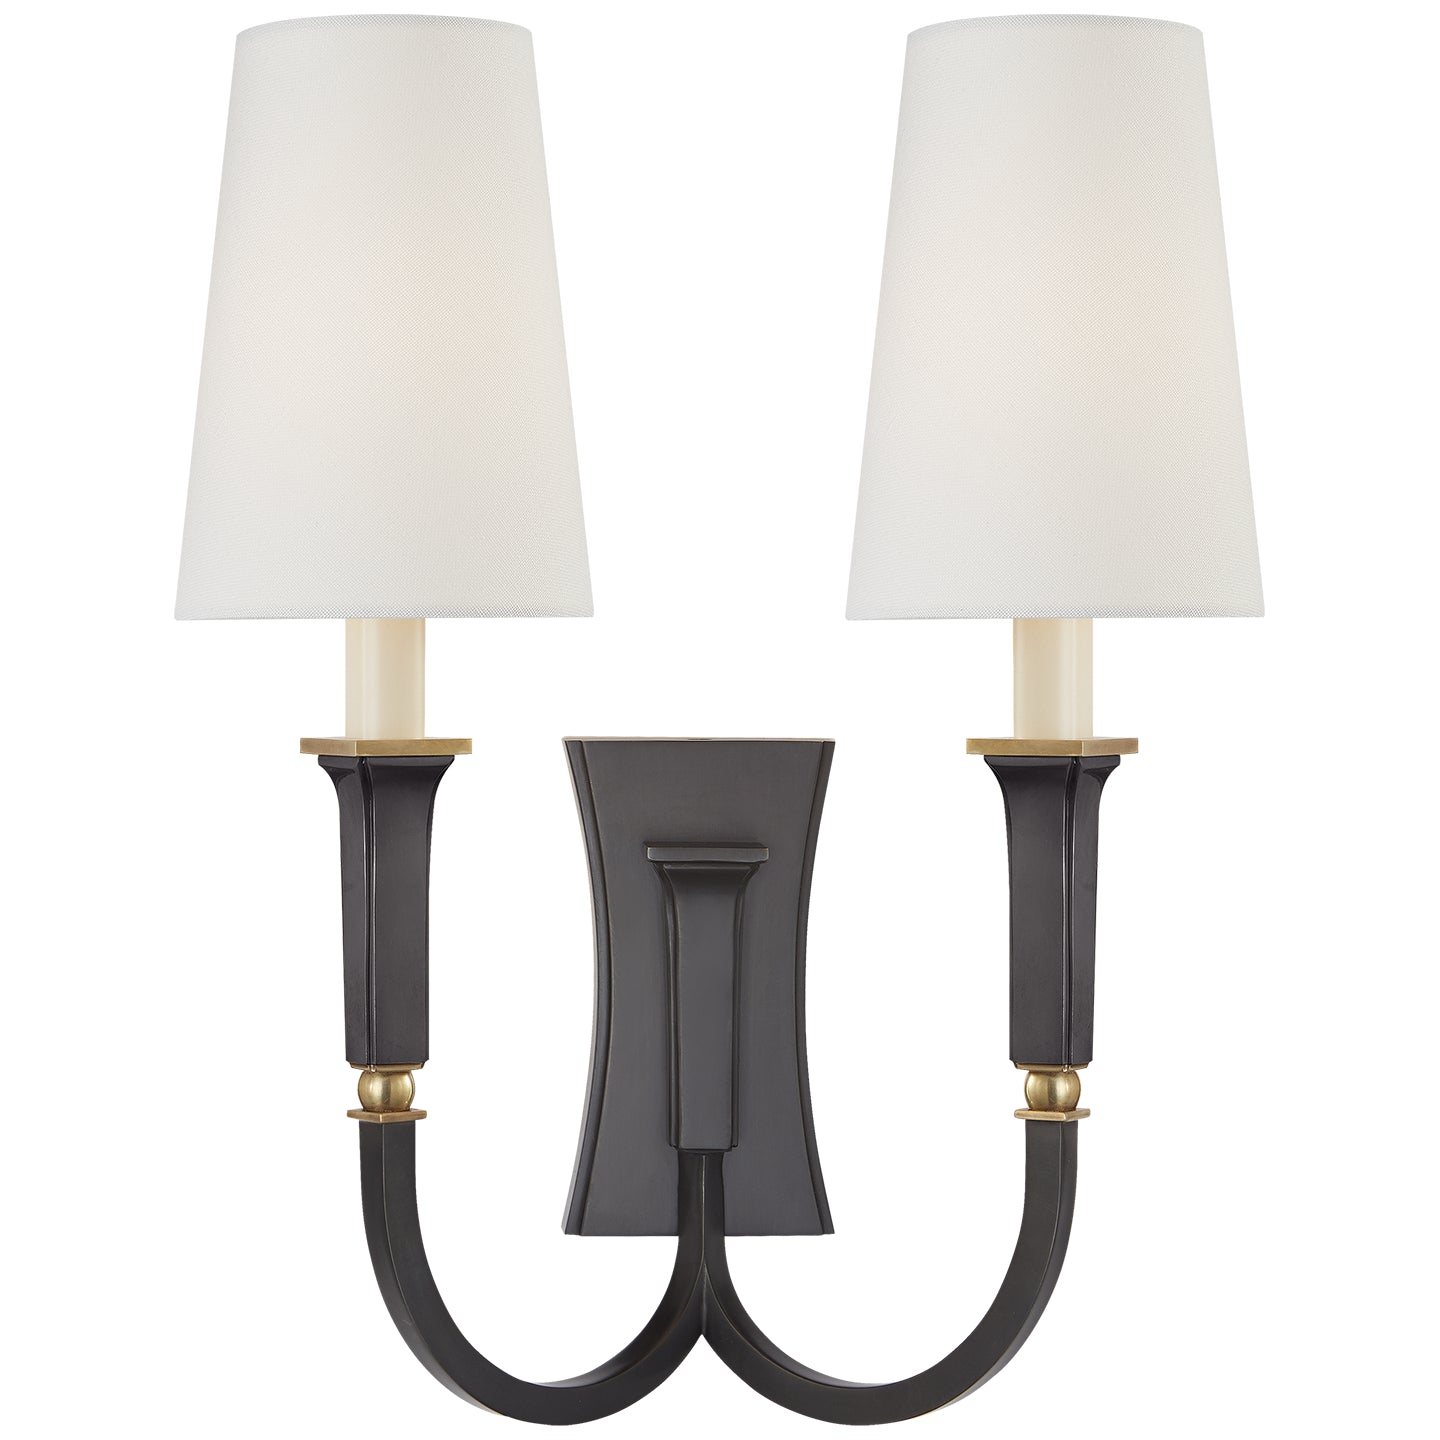 Visual Comfort Signature - TOB 2273BZ/HAB-L - Two Light Wall Sconce - Delphia - Bronze with Antique Brass